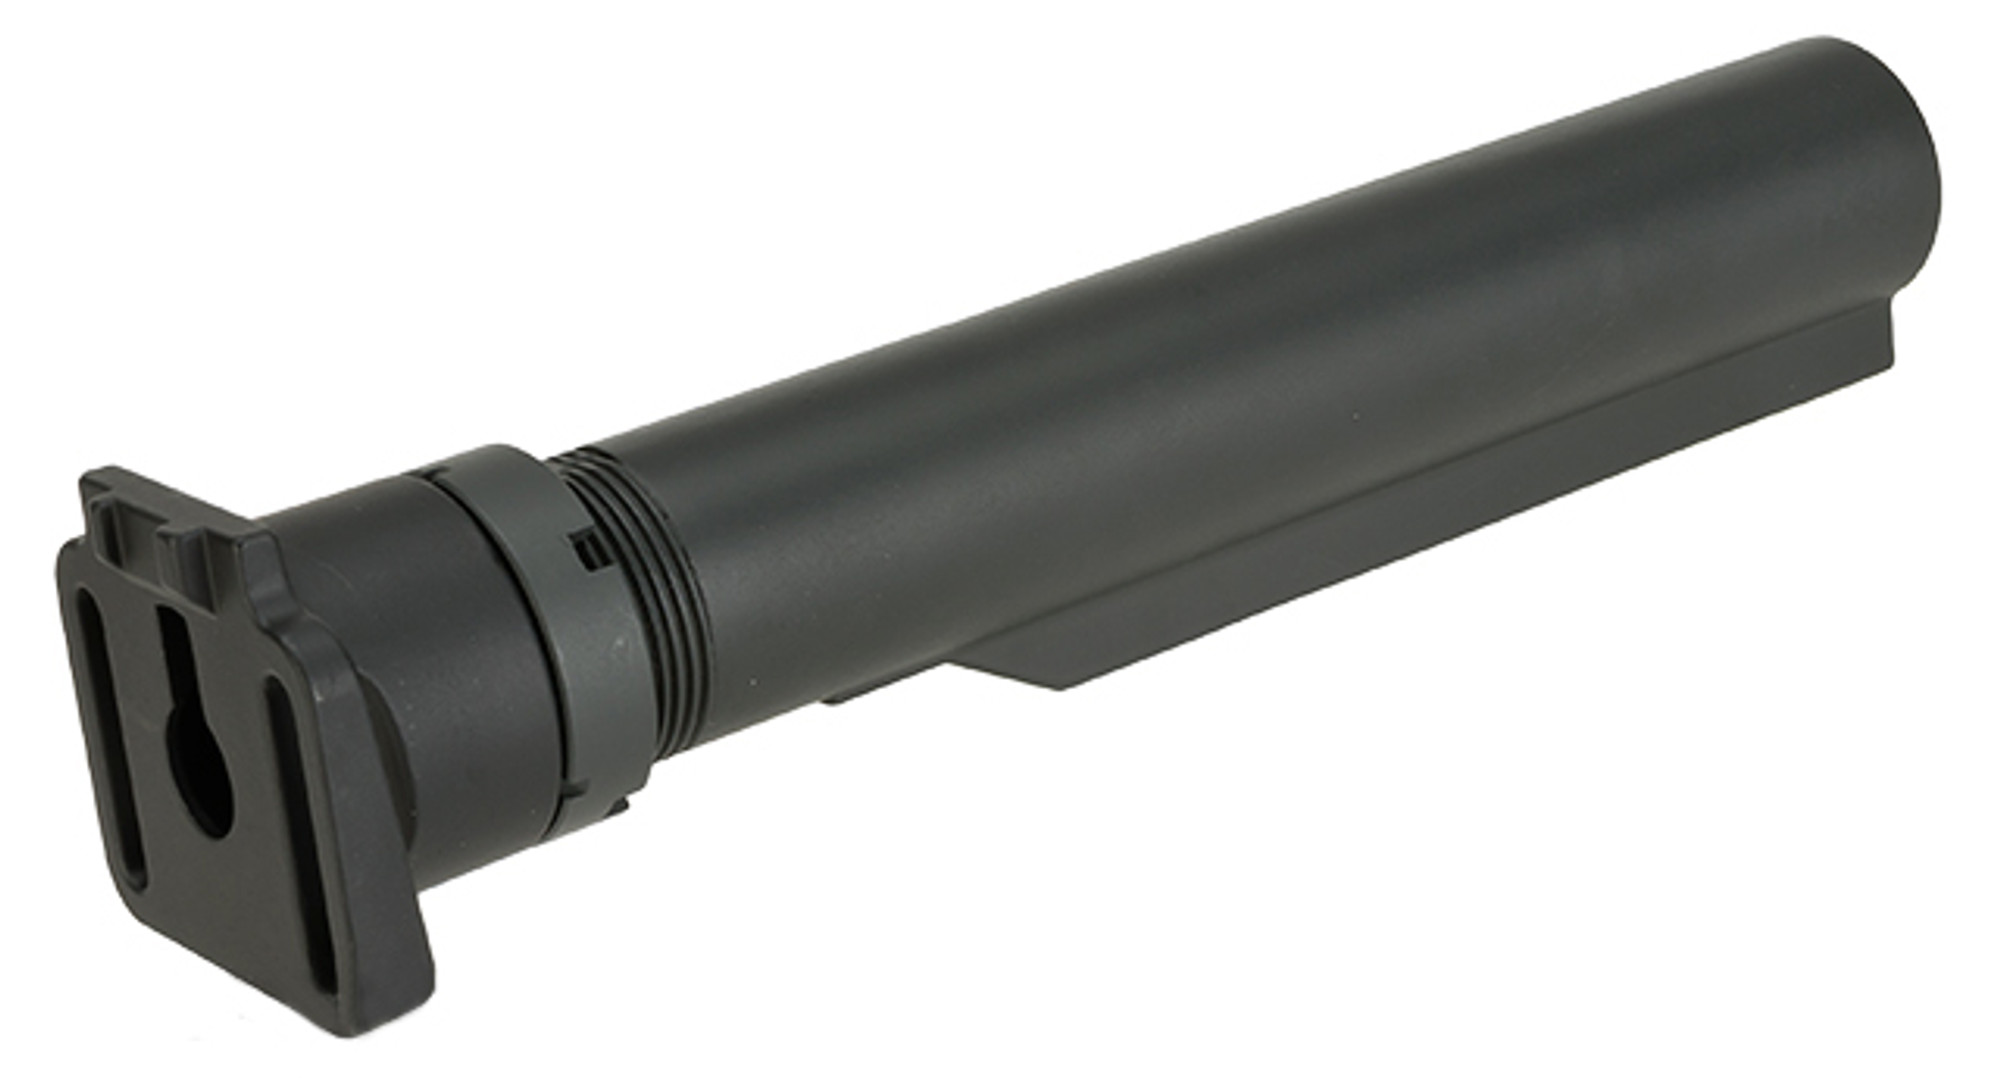 ARES M4 Buffer Tube Adapter for Ares VZ-58 Airsoft AEG Rifle